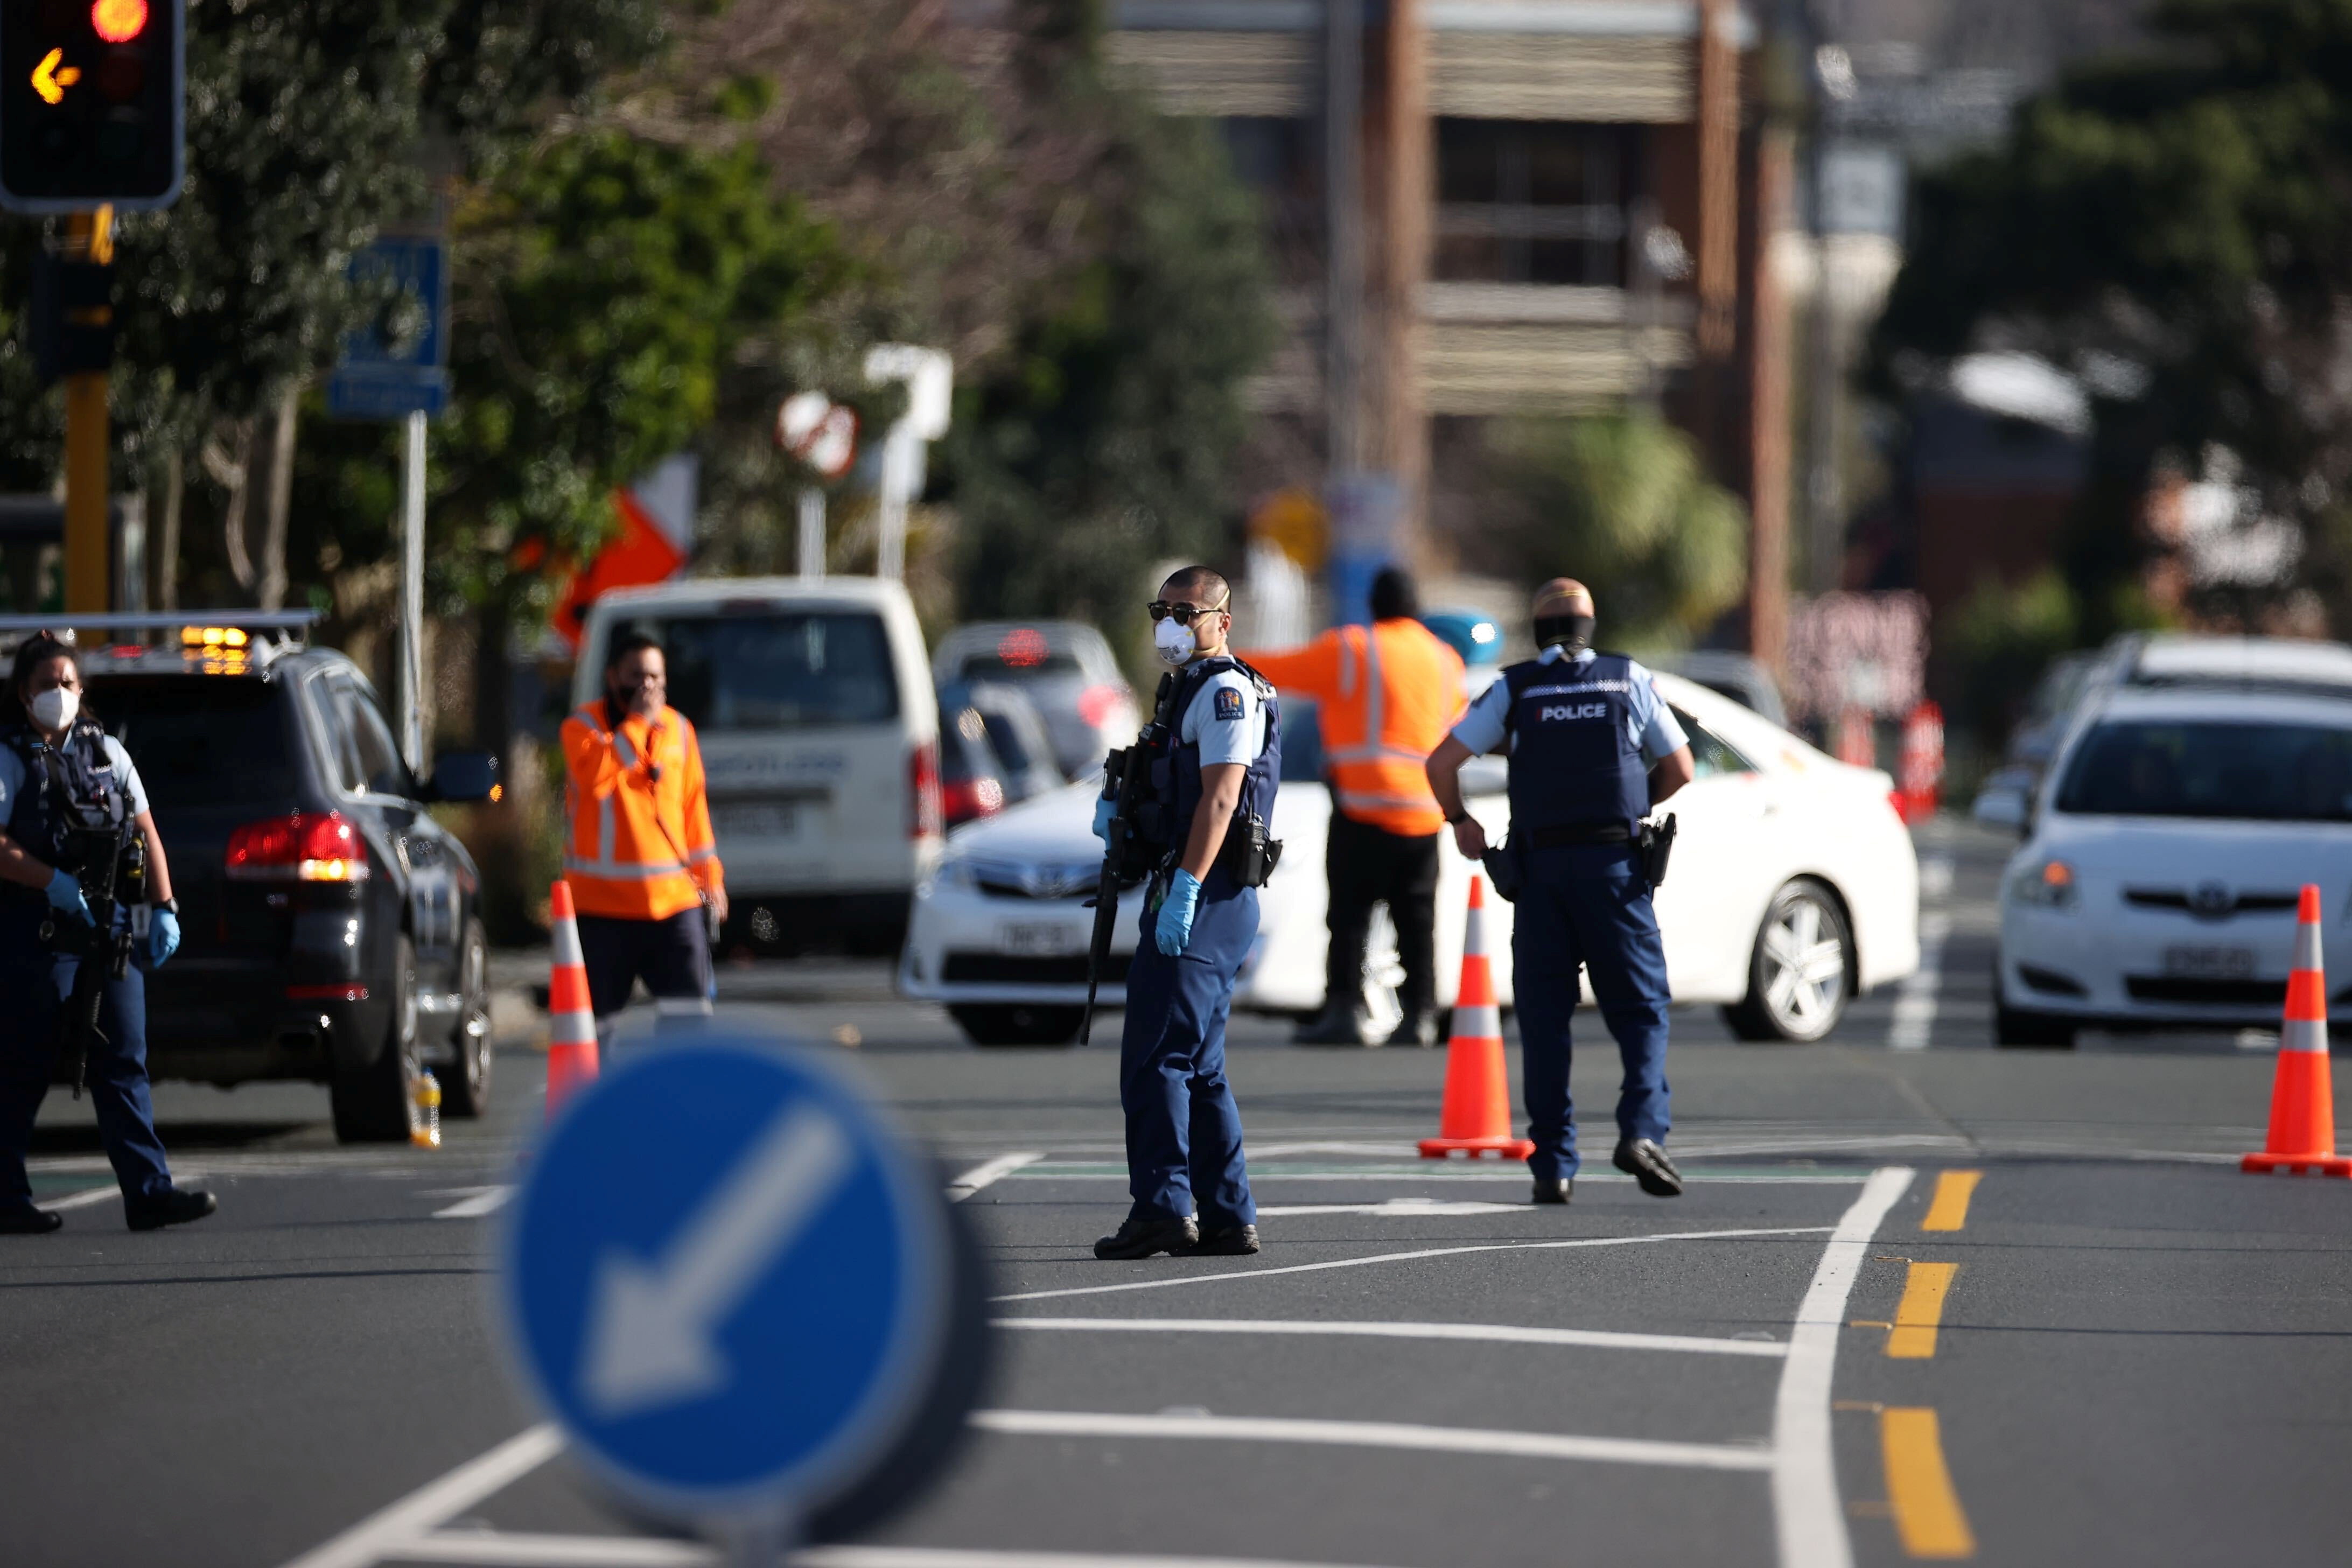 Police respond to an attack at a shopping mall in Auckland